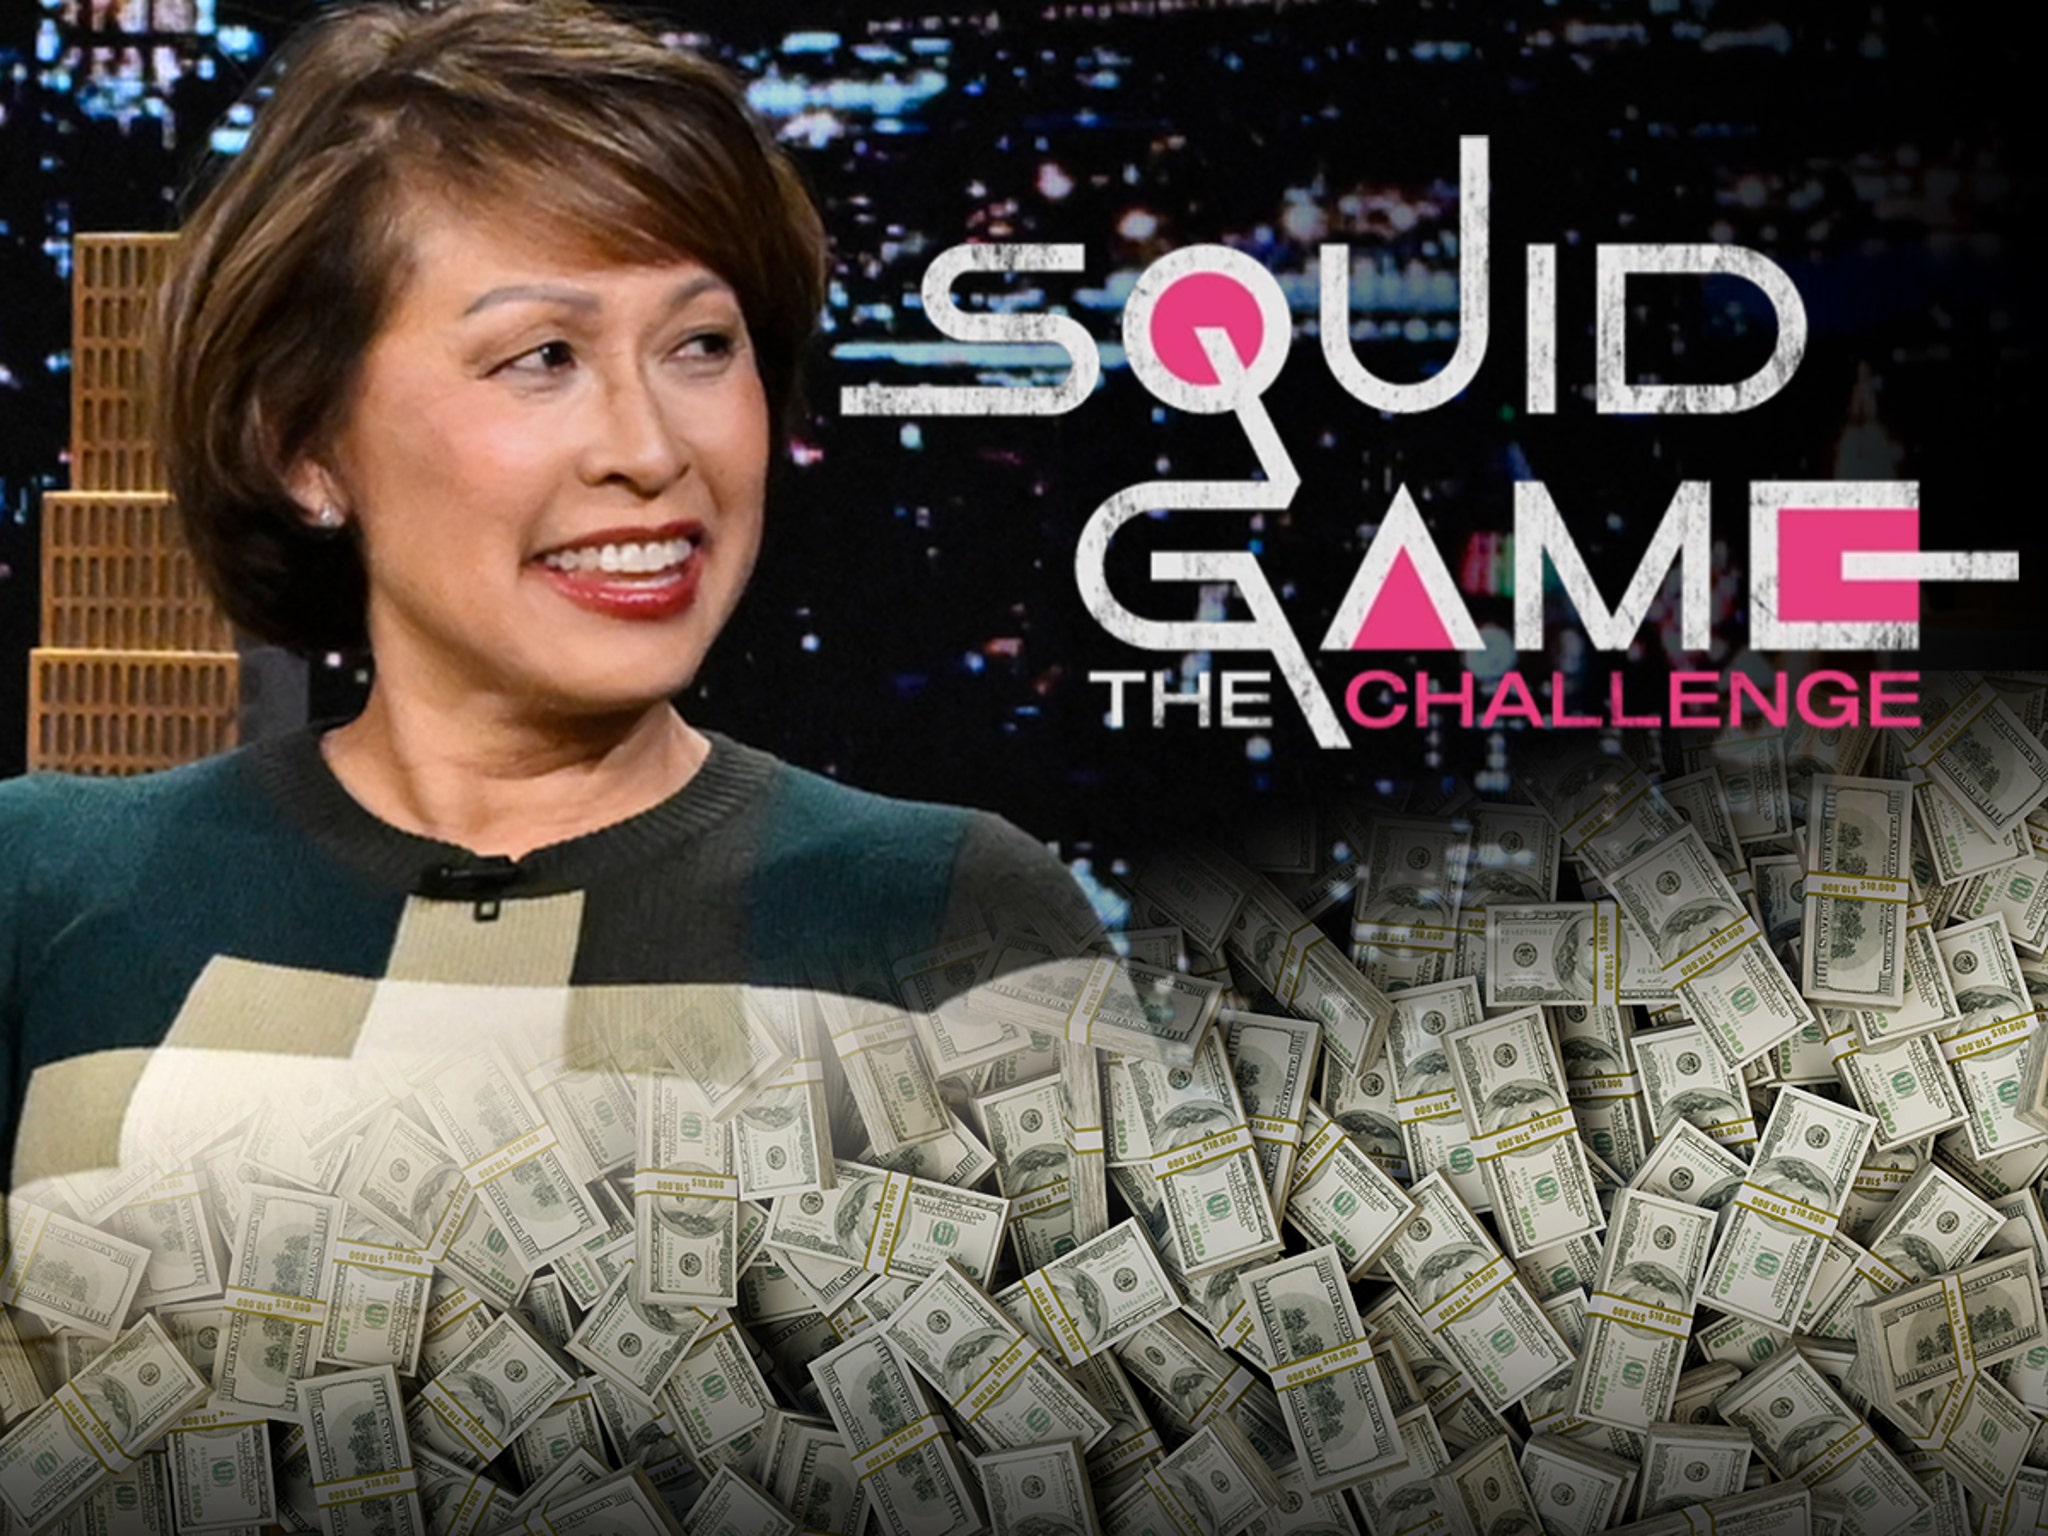 I Was in the Final 12 on 'Squid Game: the Challenge' — What I Learned